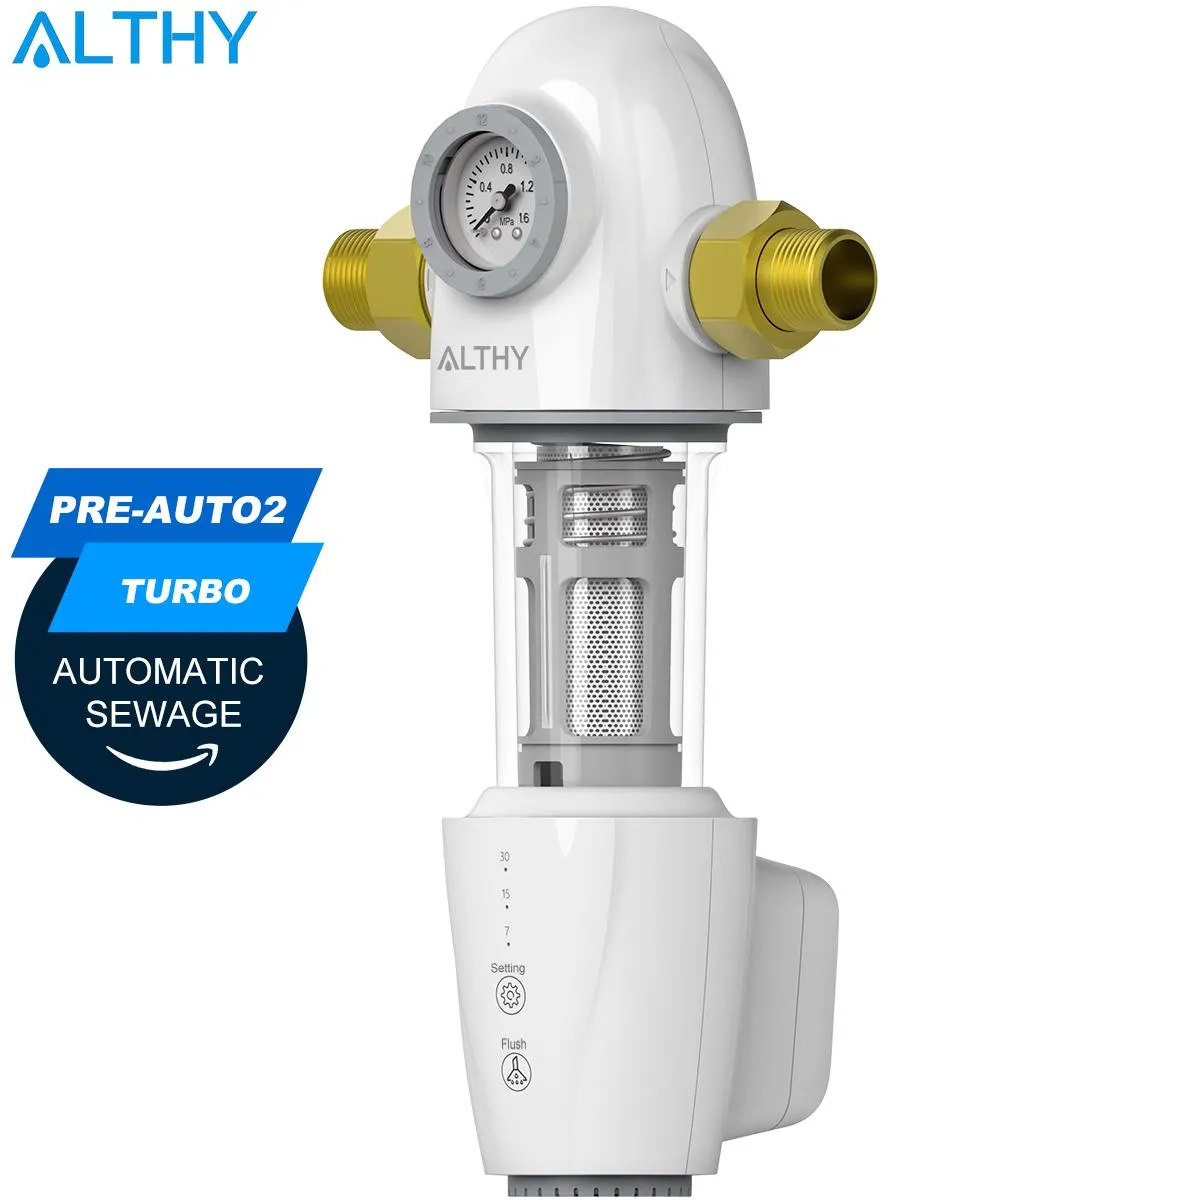 Purificadores Althy Preauto2 Automático Flushing Backwash Prefilter Spin Down Sediment Water Filter Central Whole House Purifier System